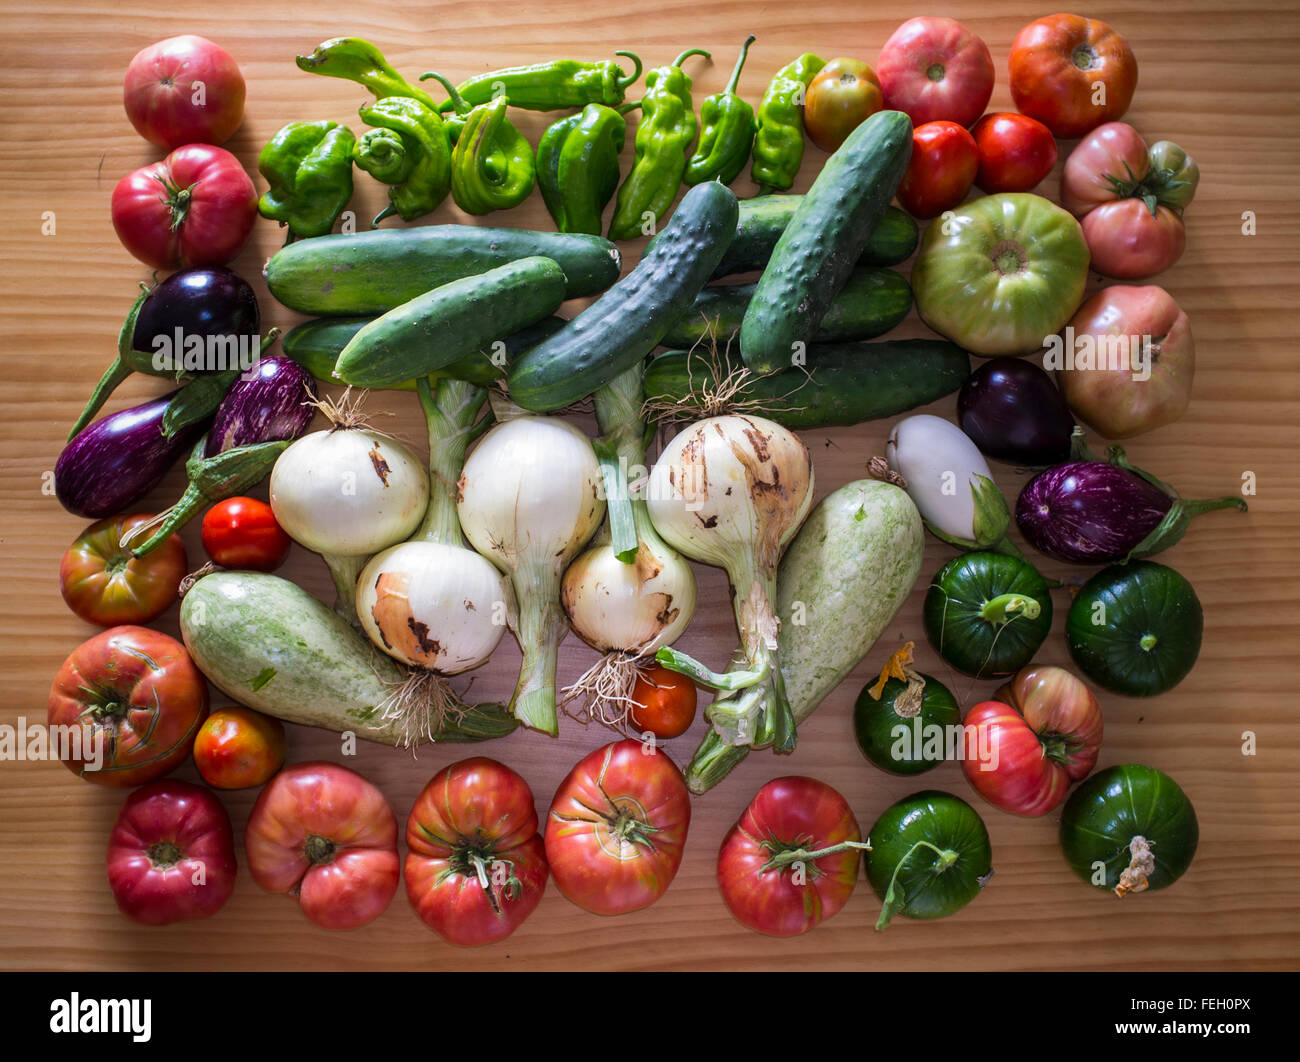 Large, beautiful organically home grown vegetables. Grown in Carcabuey, Cordoba, Andalusia. Spain Stock Photo